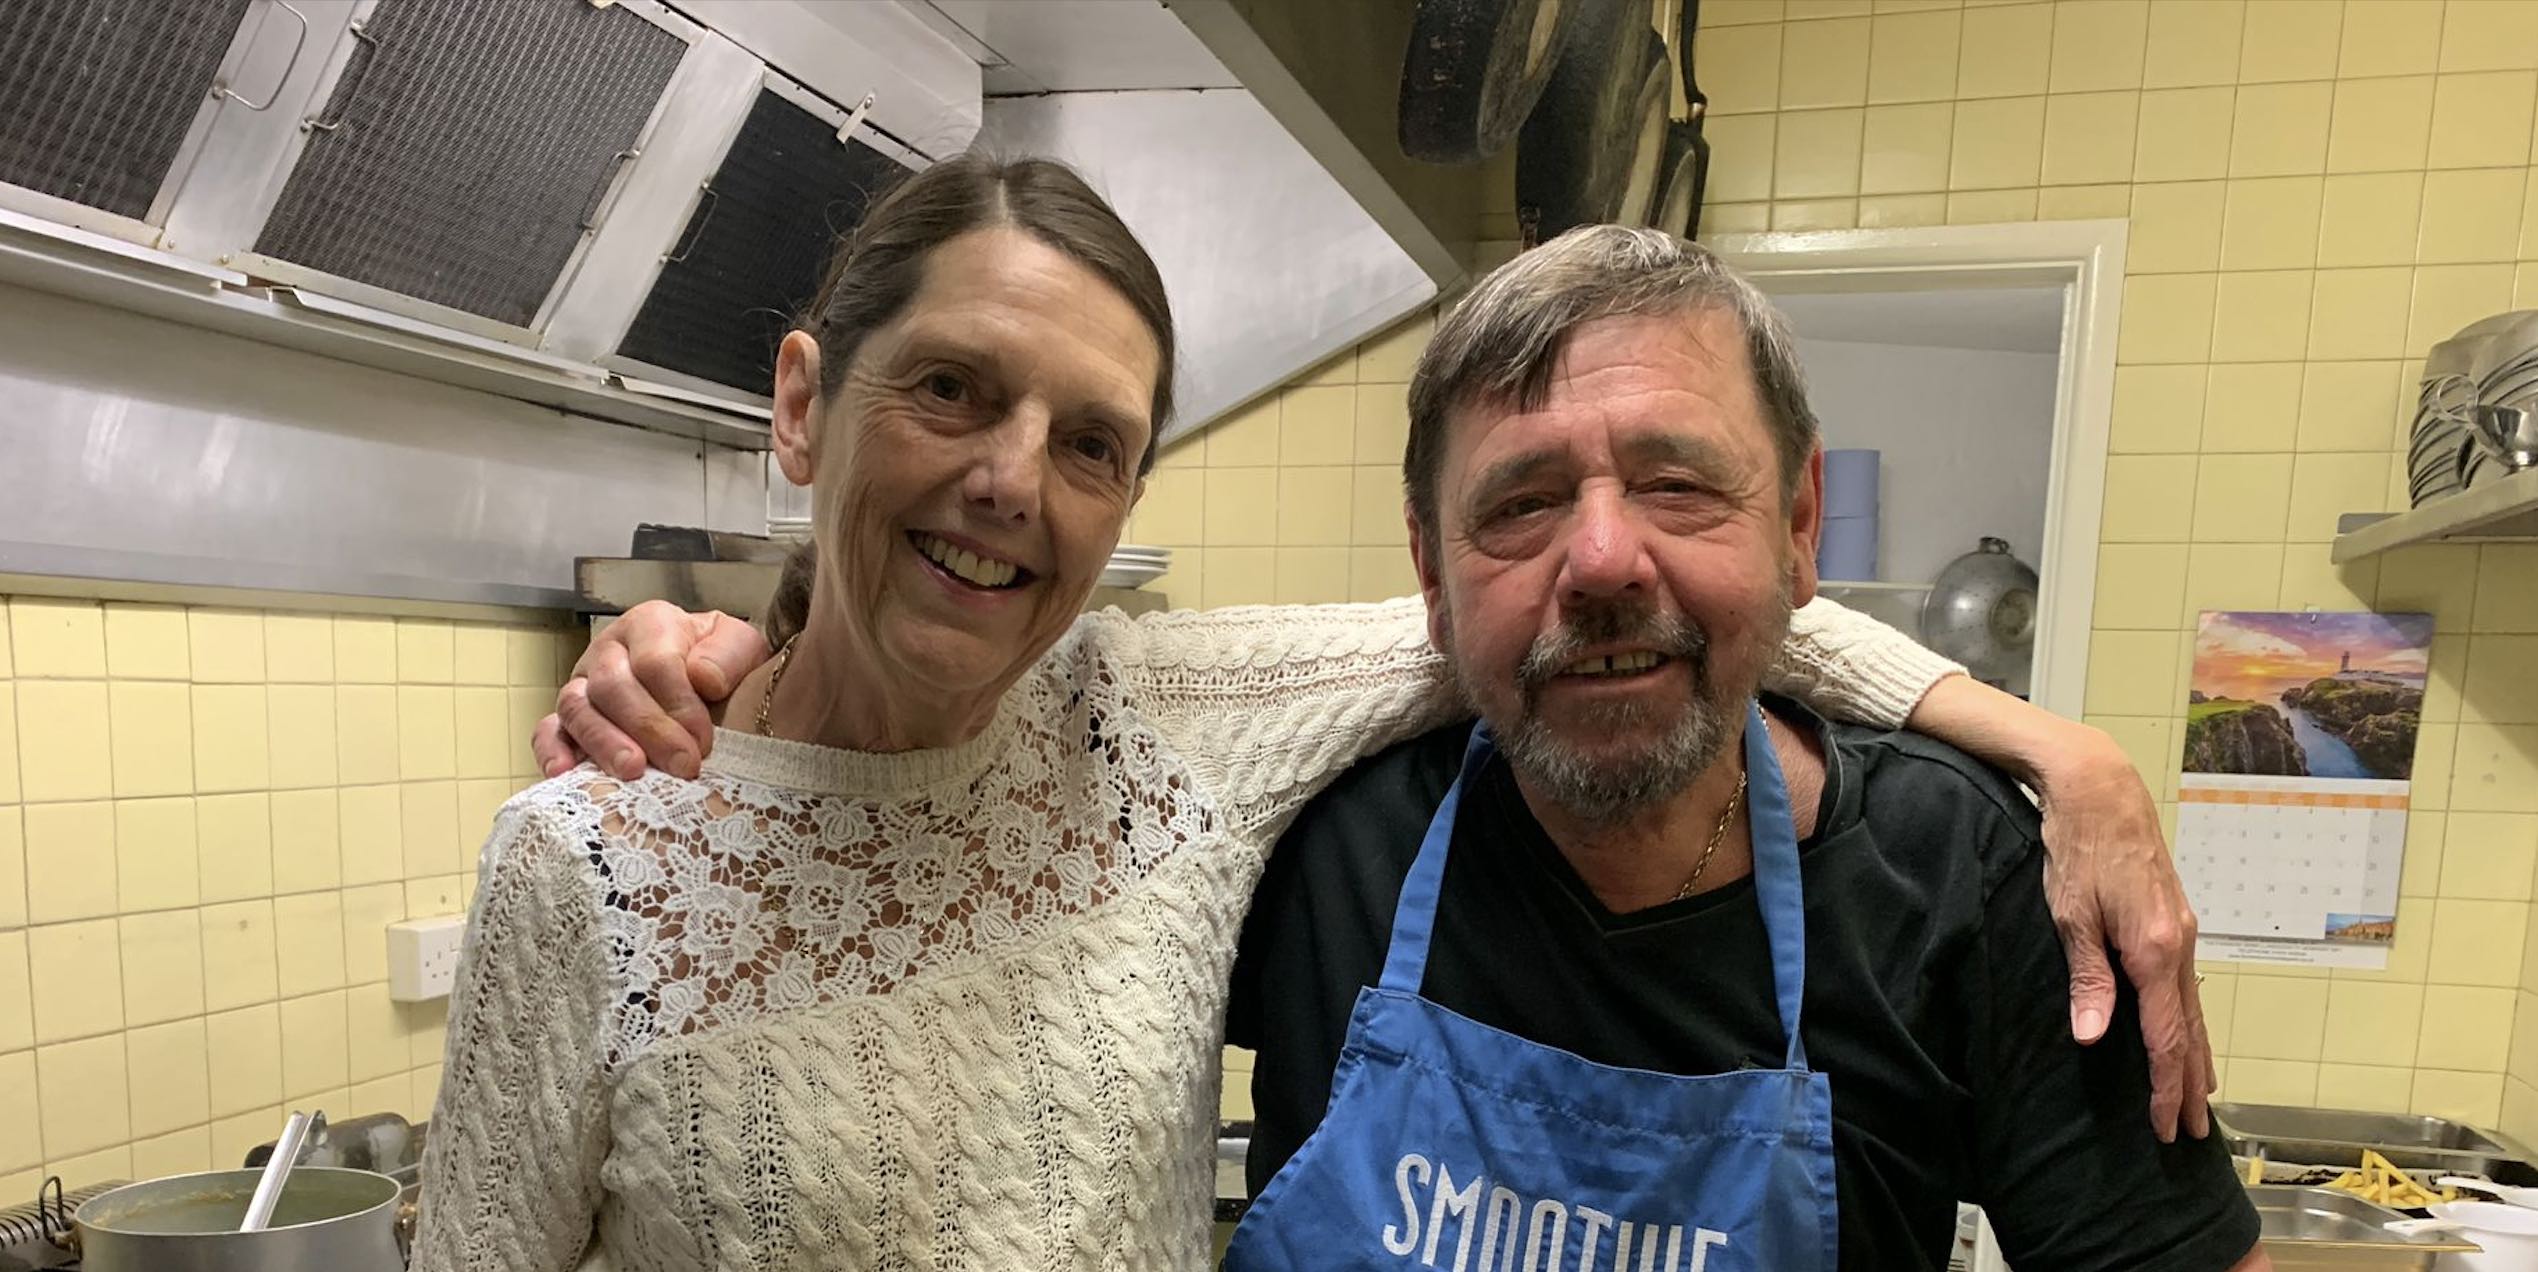 Smiling couple in pub kitchen with arms around each other